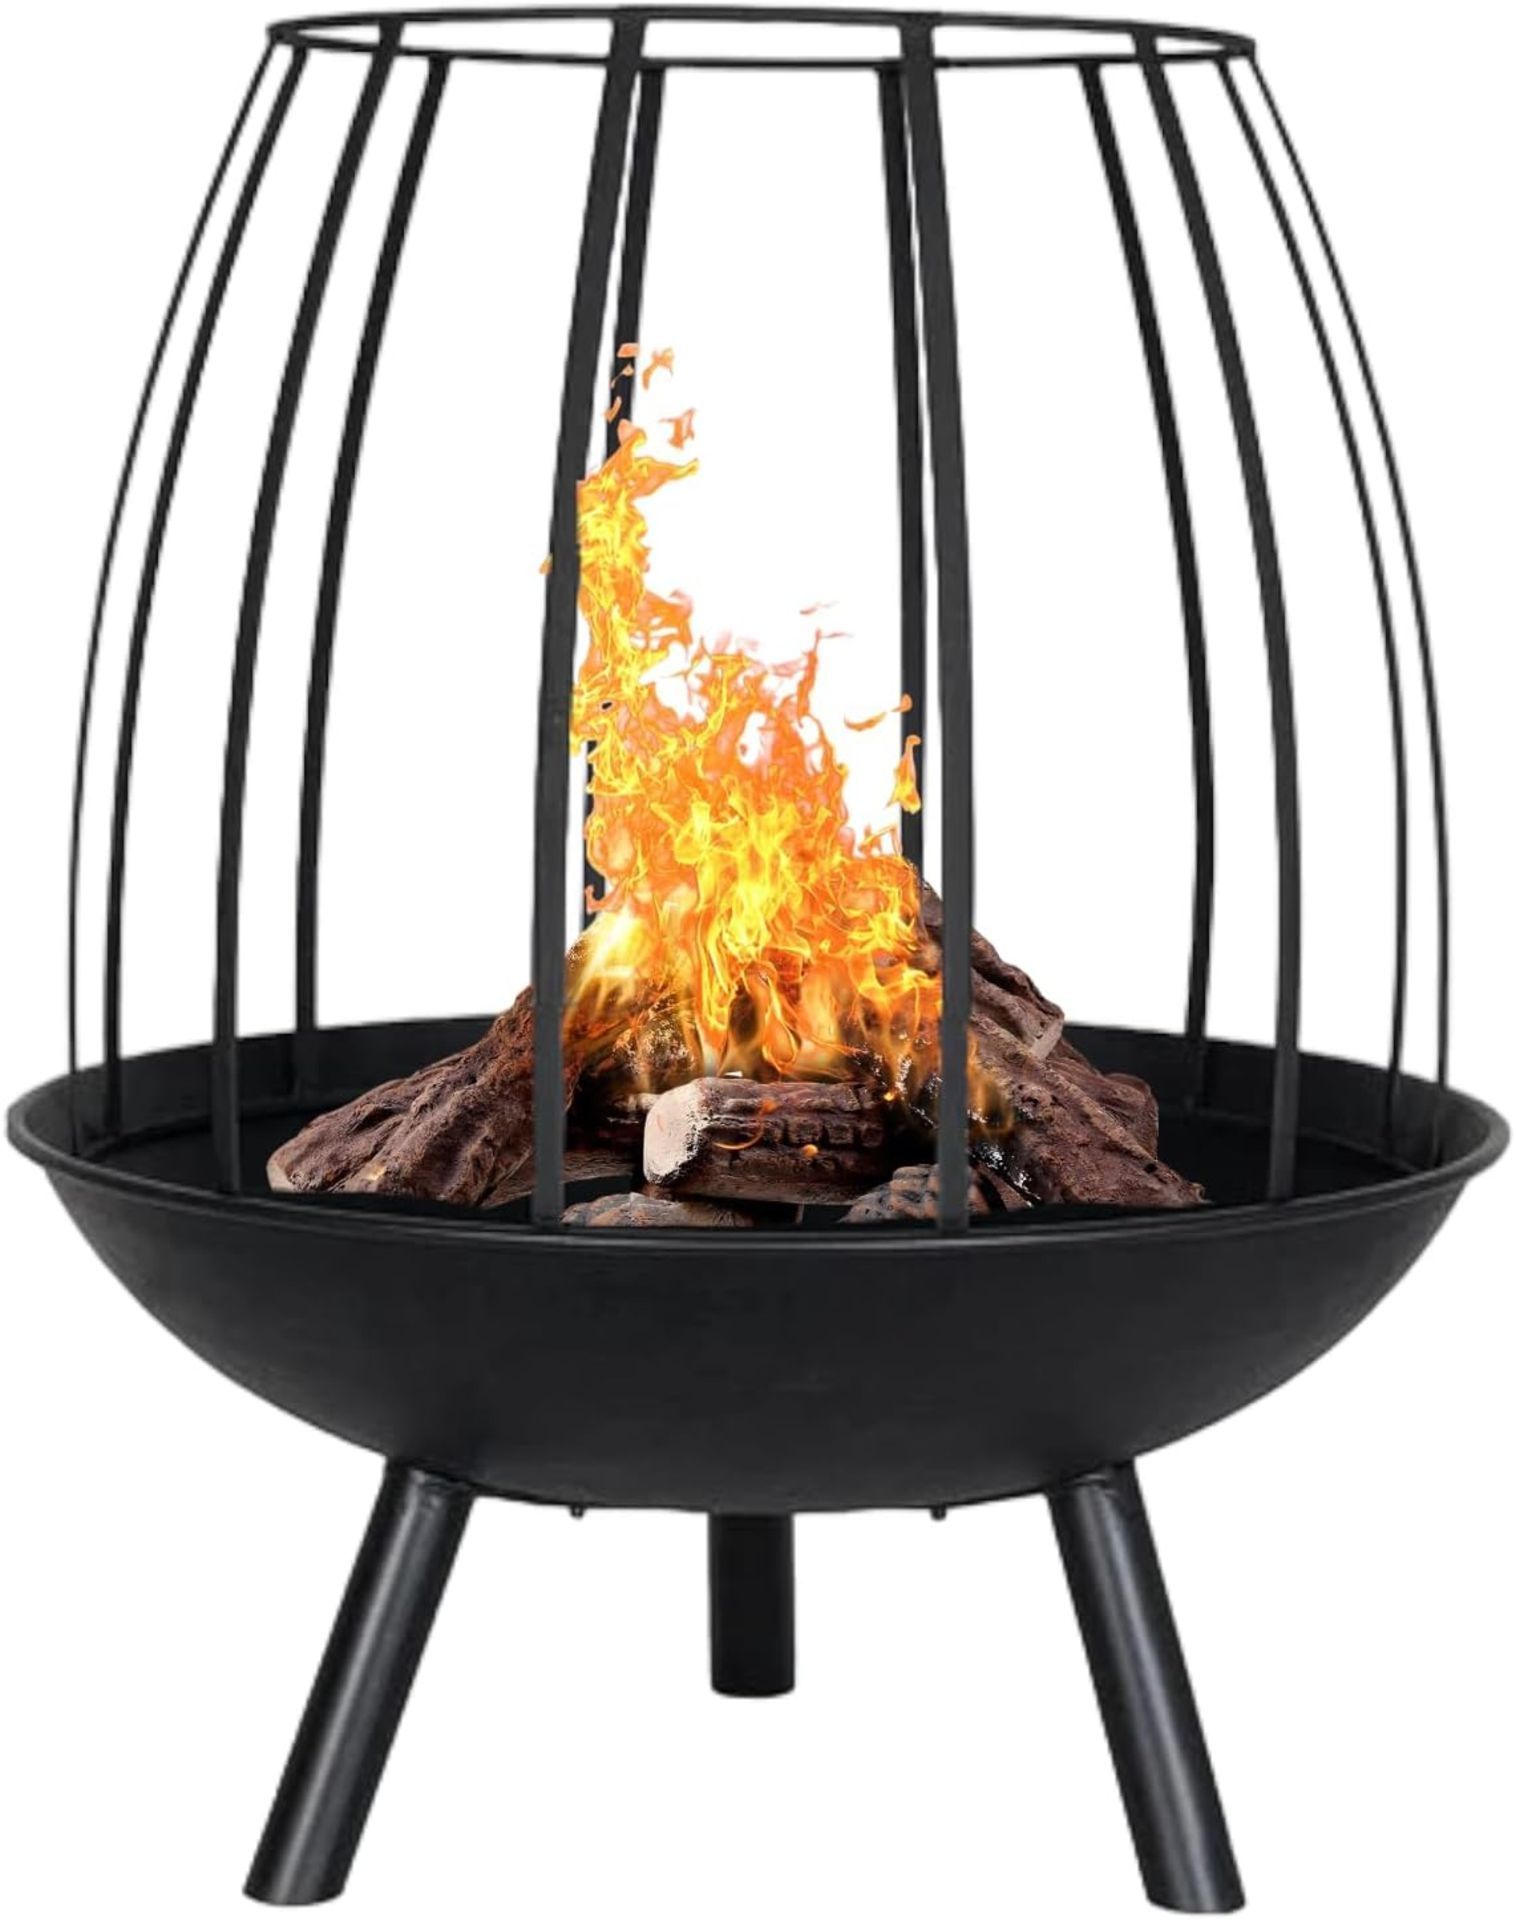 TRADE LOT 5 X NEW & BOXED LA HACIENDA Circular Open Firepit. RRP £139.99 EACH. Simple and stylish,